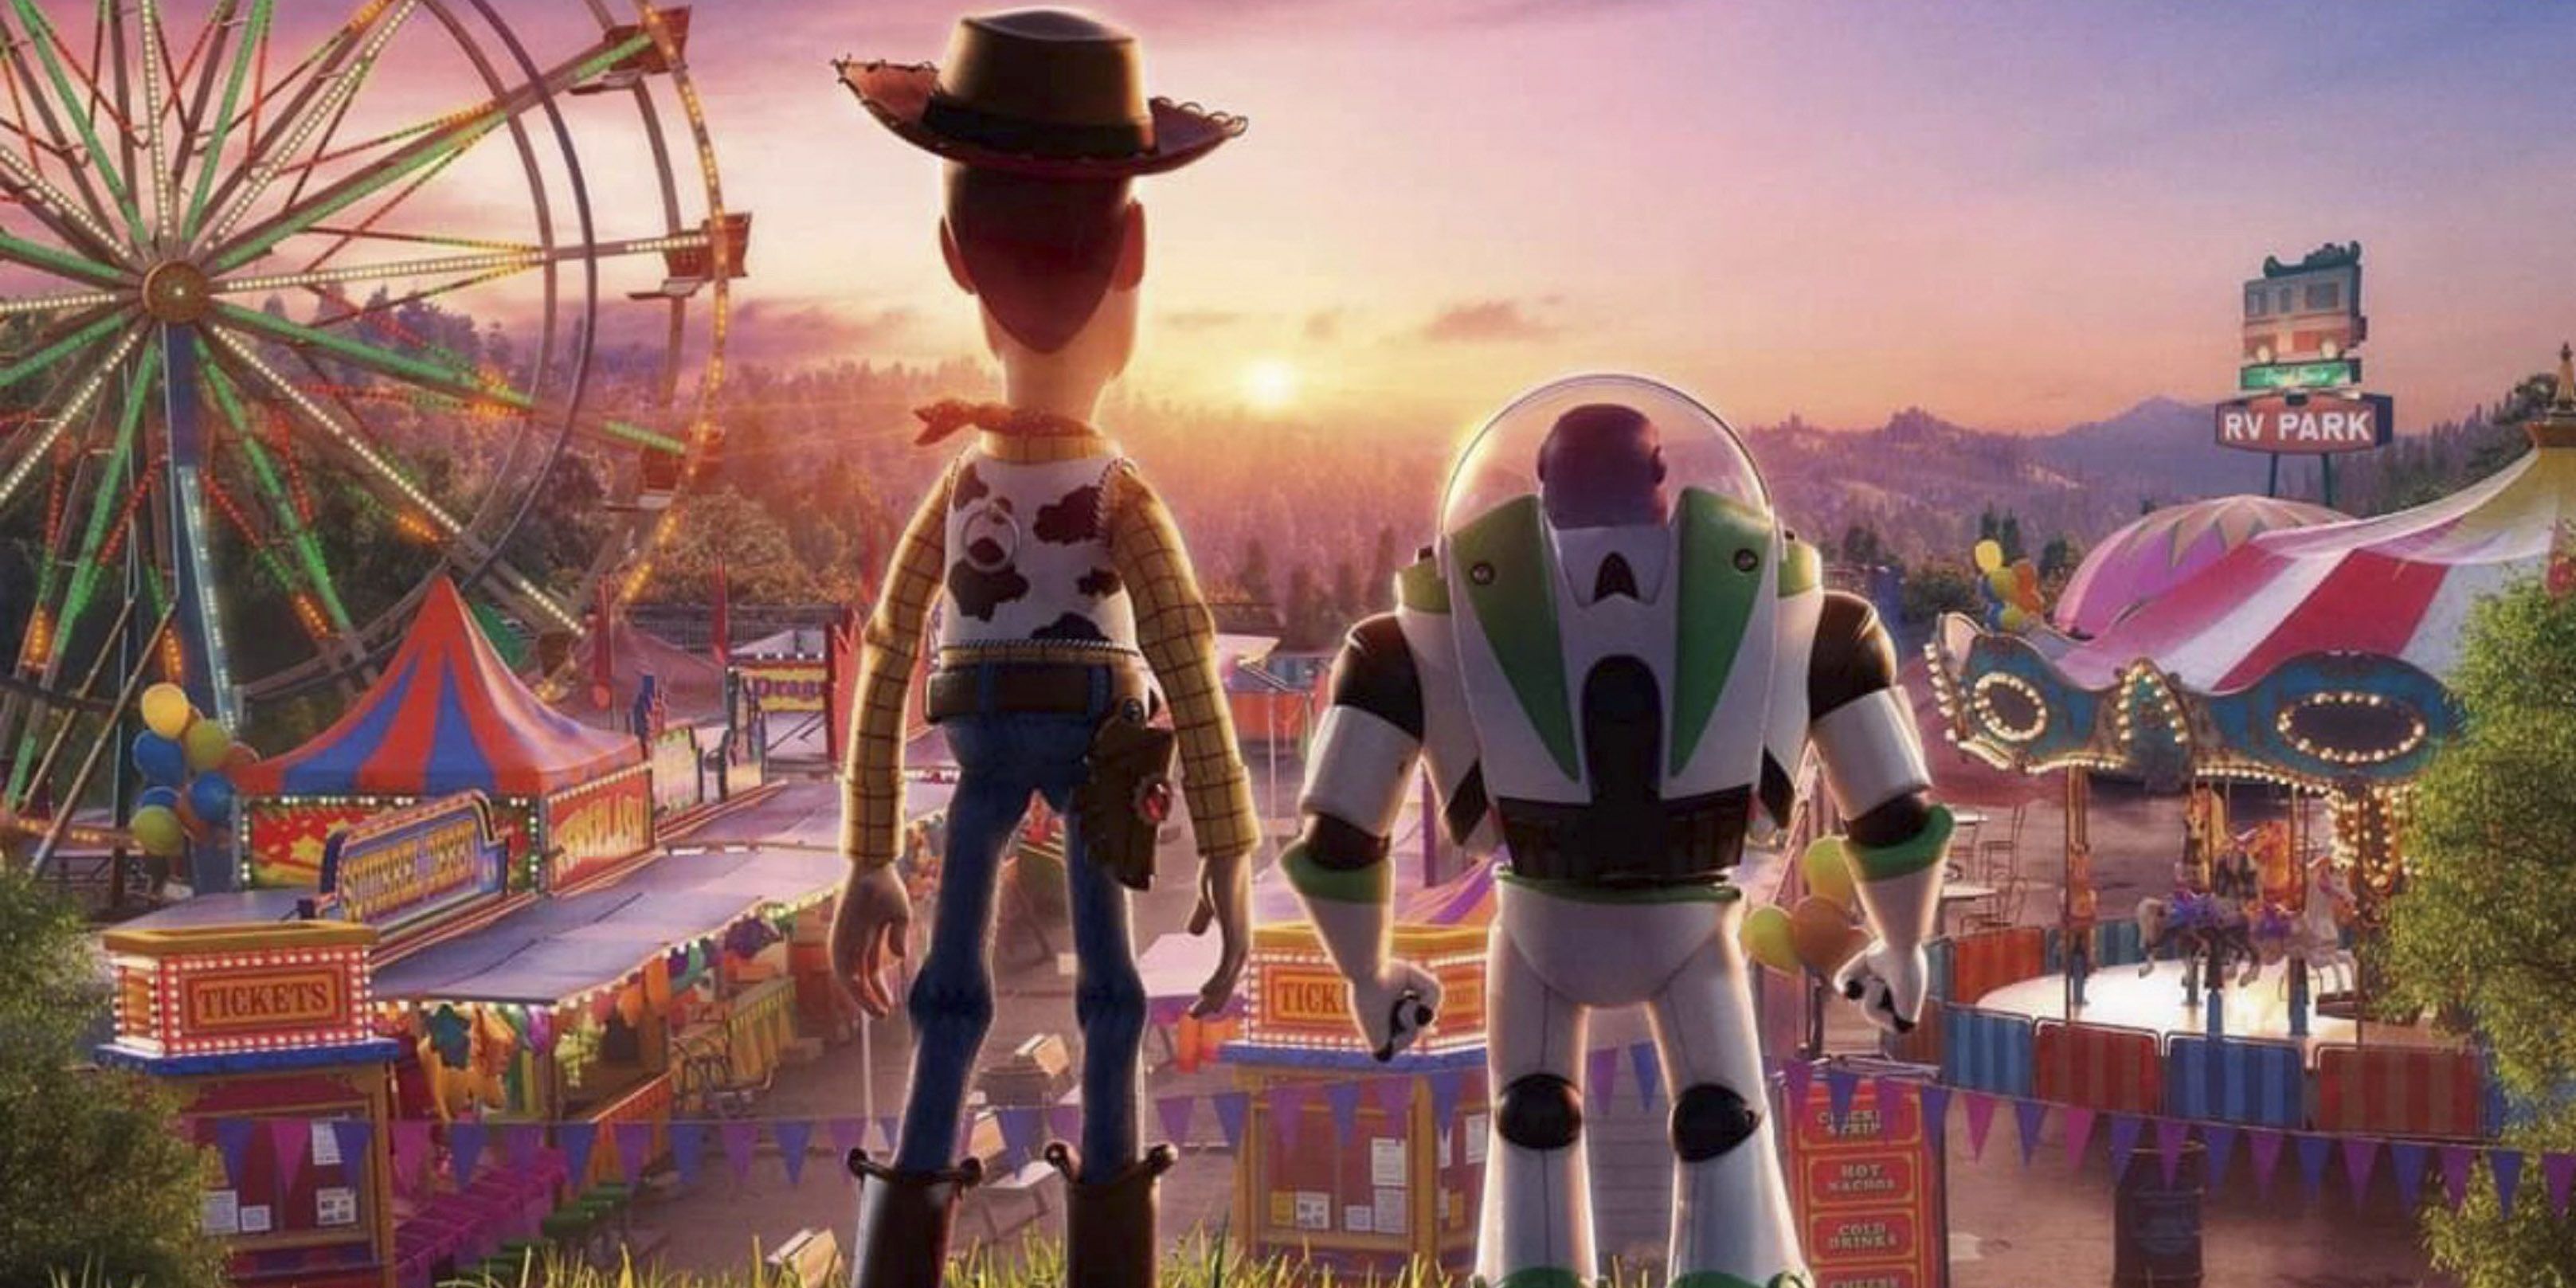 Woody and BUzz look at the fairground in Toy Story 4